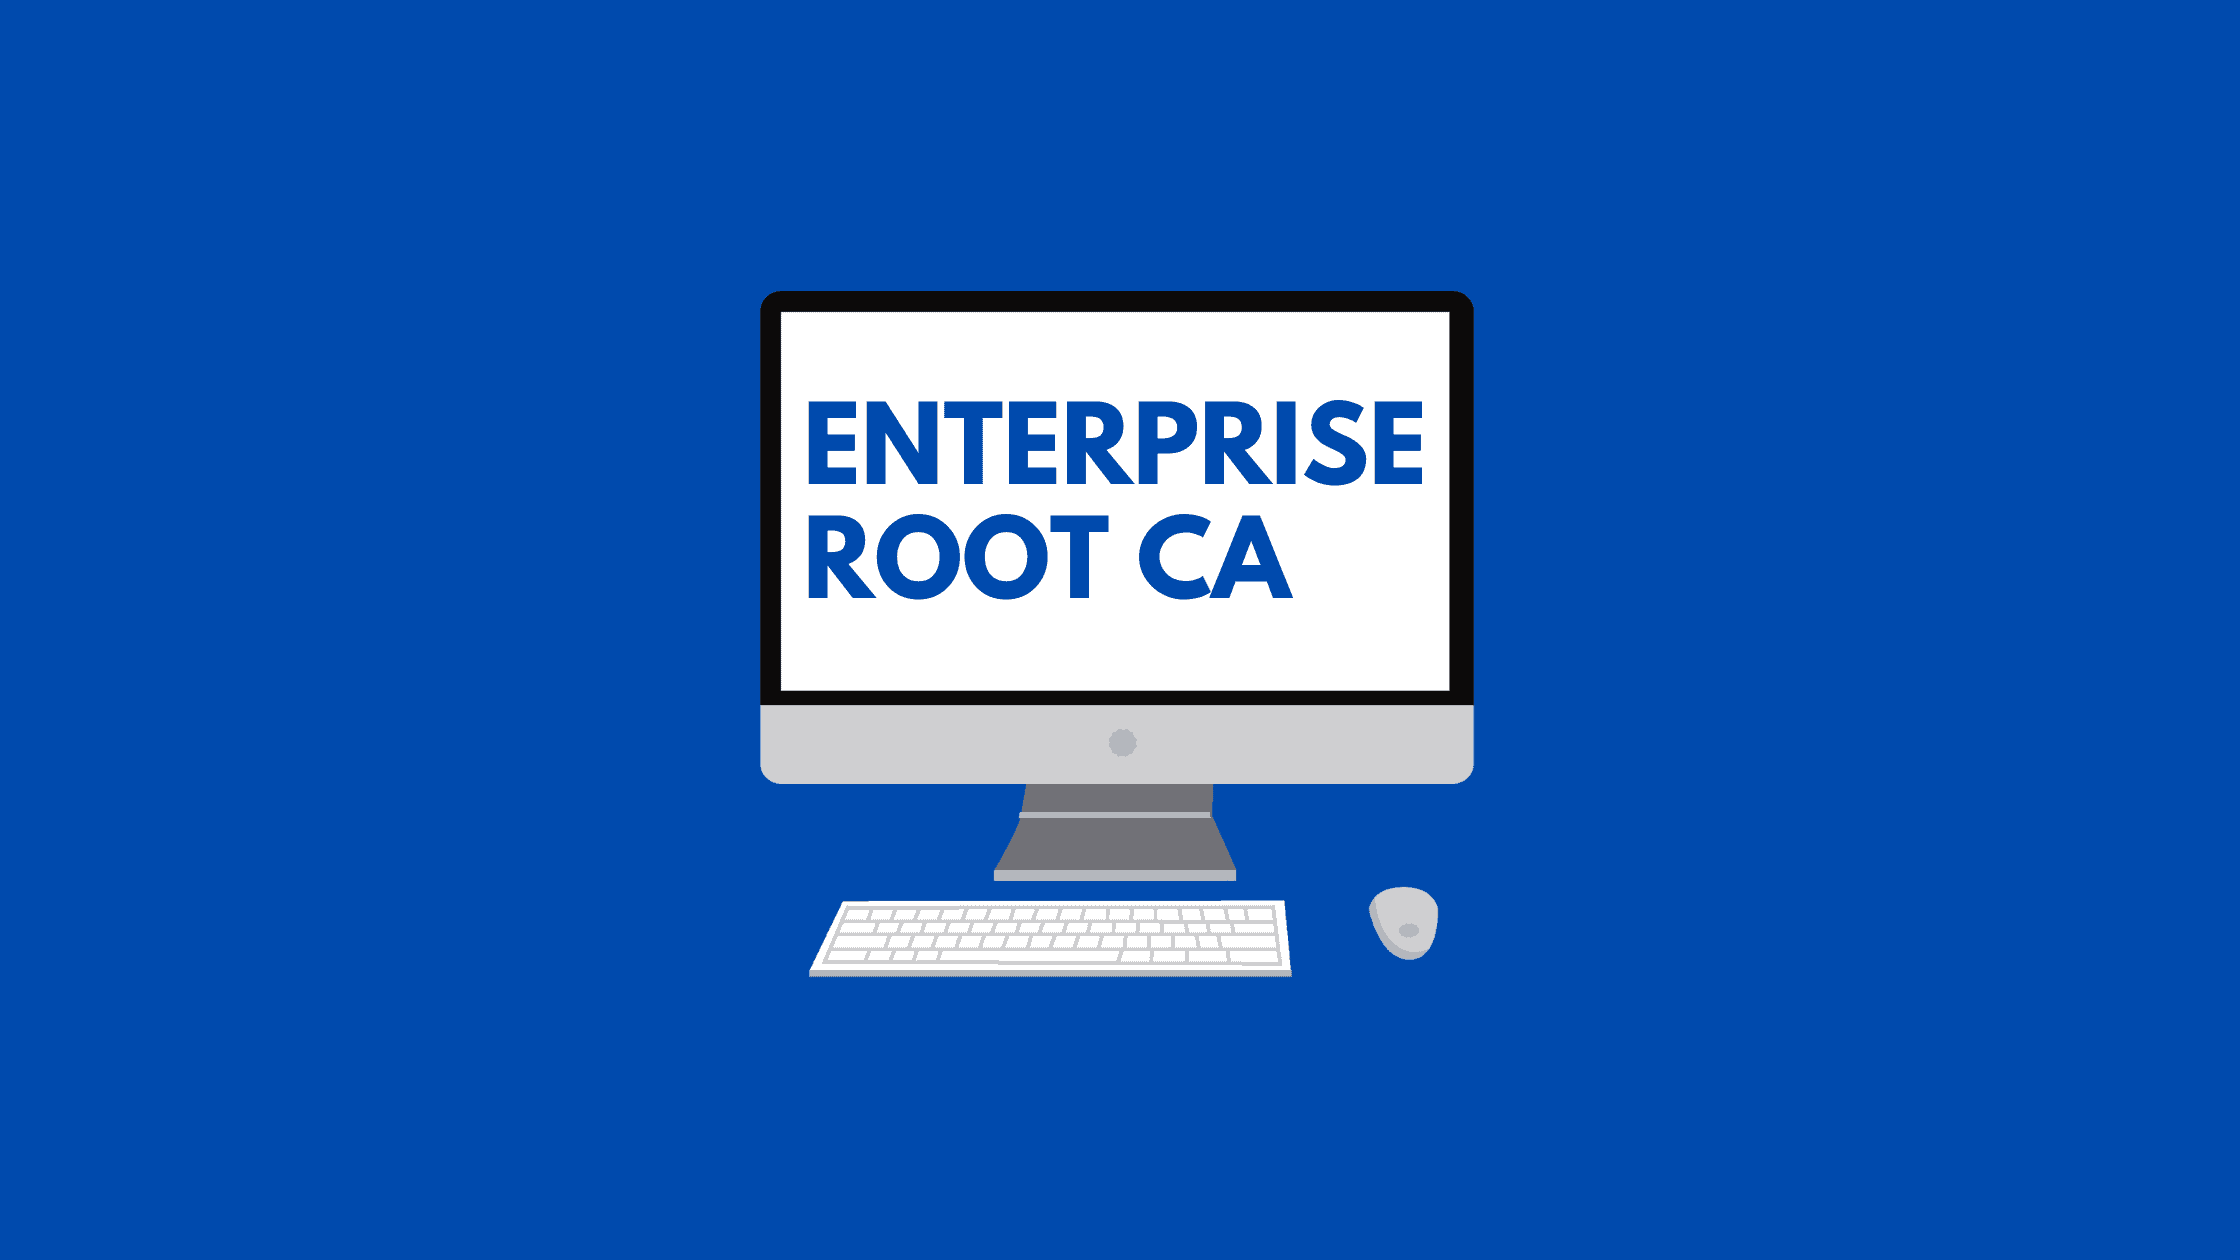 Step By Step Procedure To Set Up An Enterprise Root Ca On Windows Server